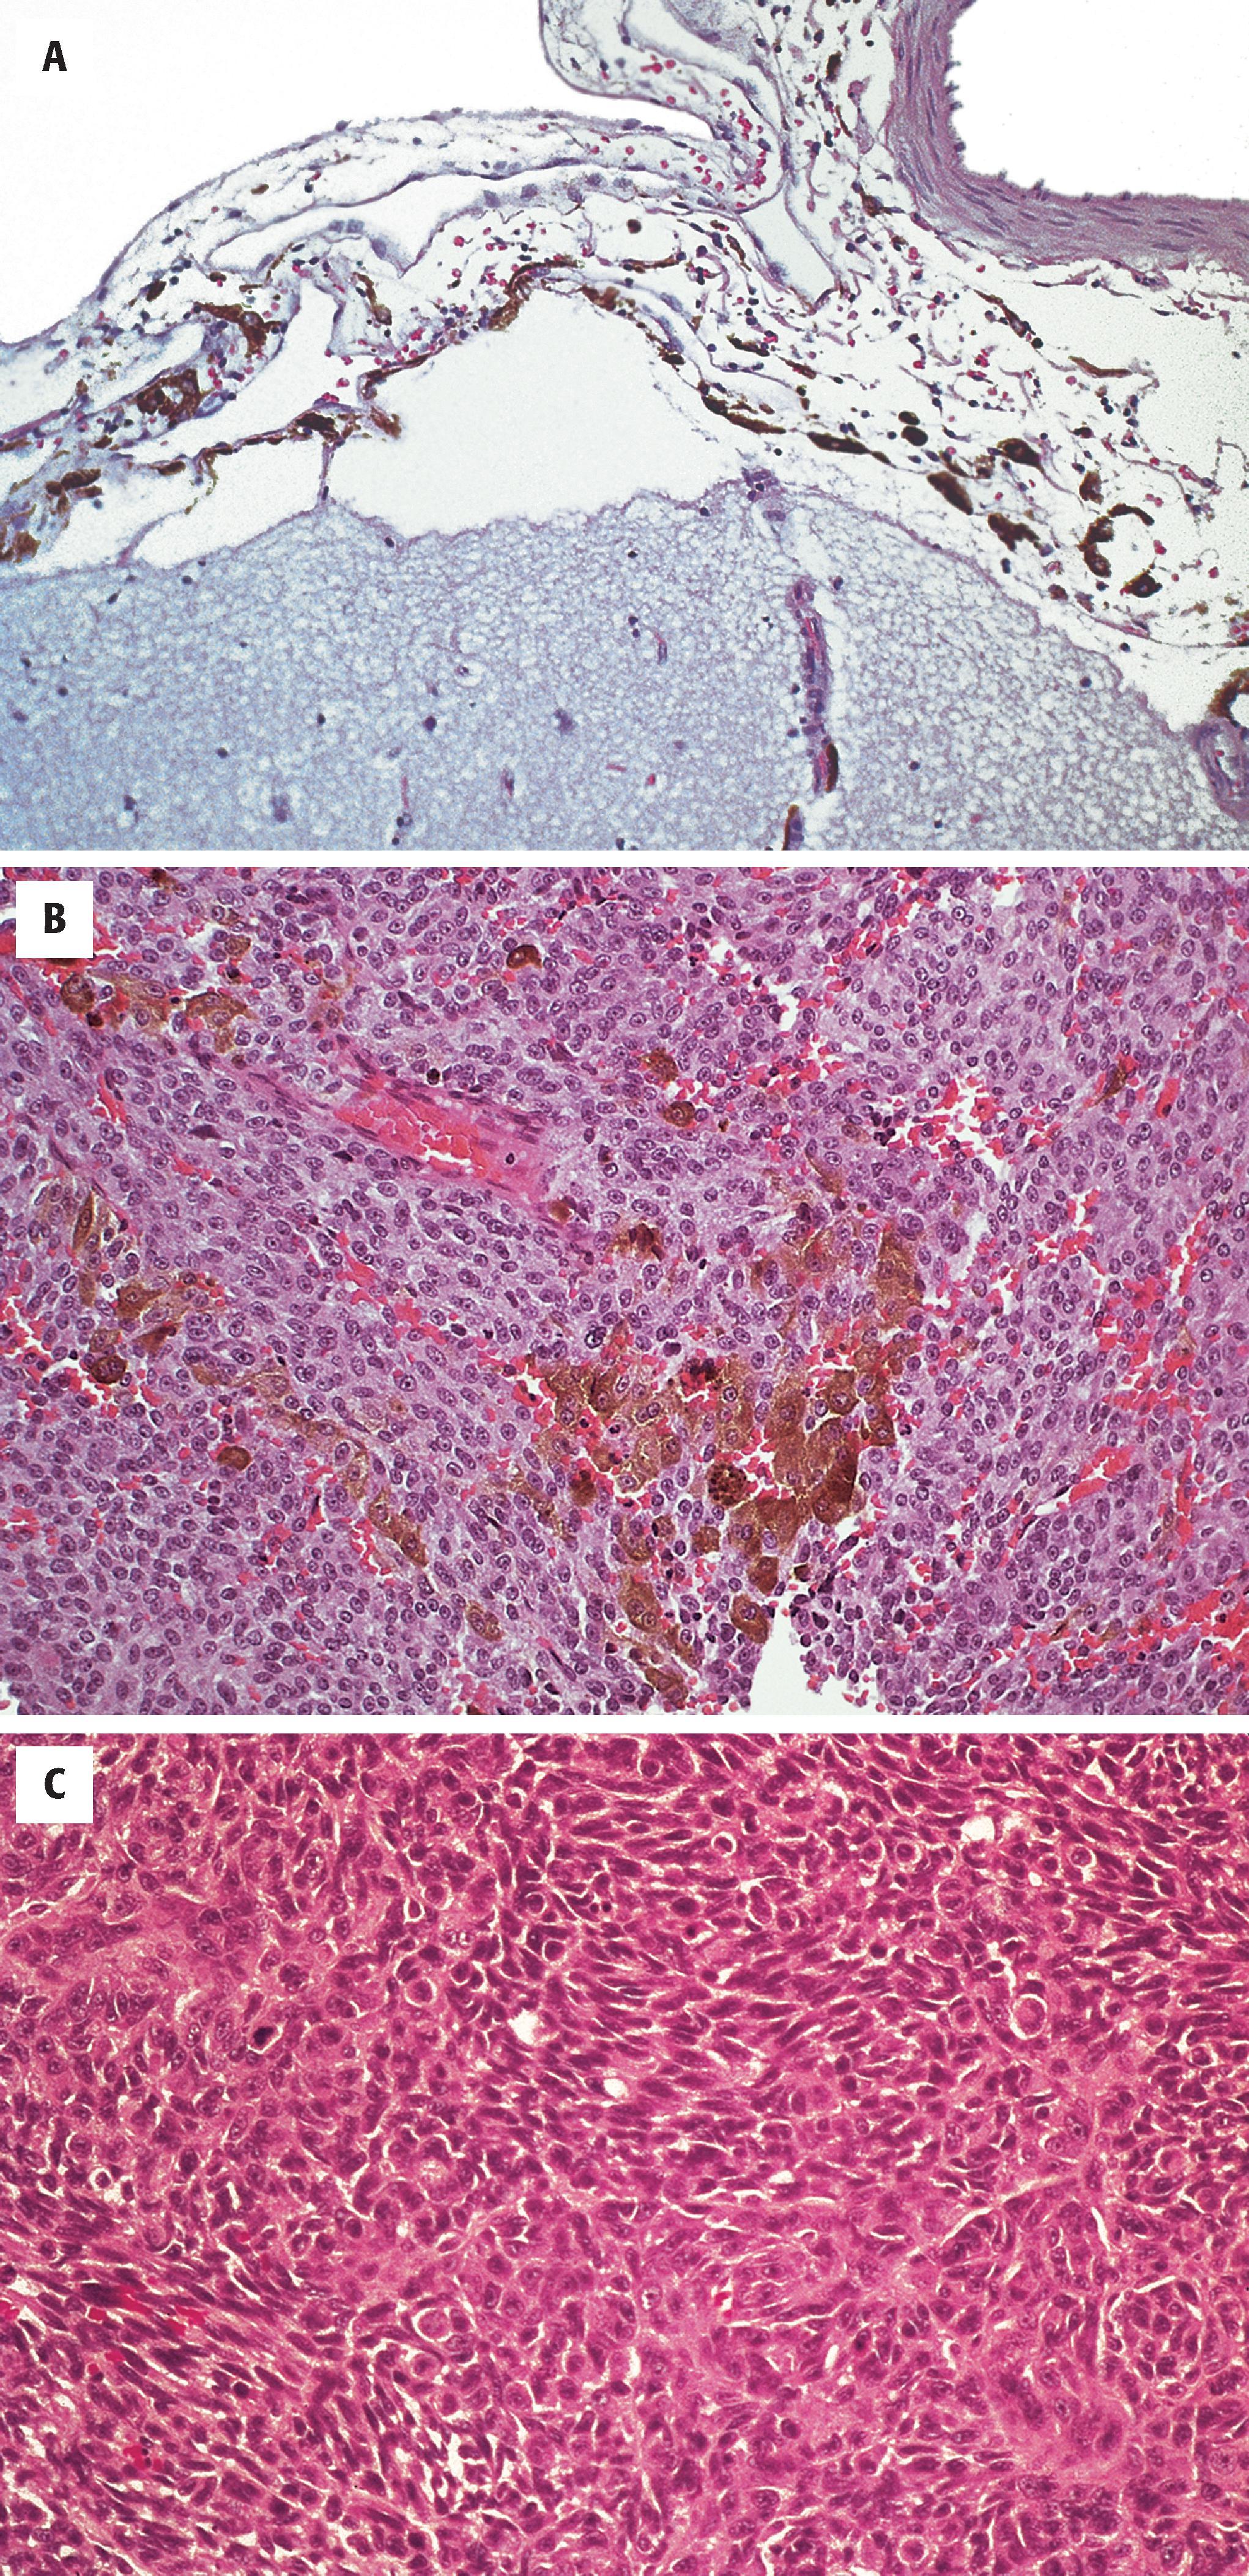 FIGURE 10.9, A, Proliferation of nevoid cells in the leptomeninges marks melanocytosis. B, Melanocytoma characterized by a proliferation of monomorphic-appearing cells and abundant melanin deposition. C, Markedly hypercellular malignant melanoma with prominent nuclear atypia and mitotic figures.